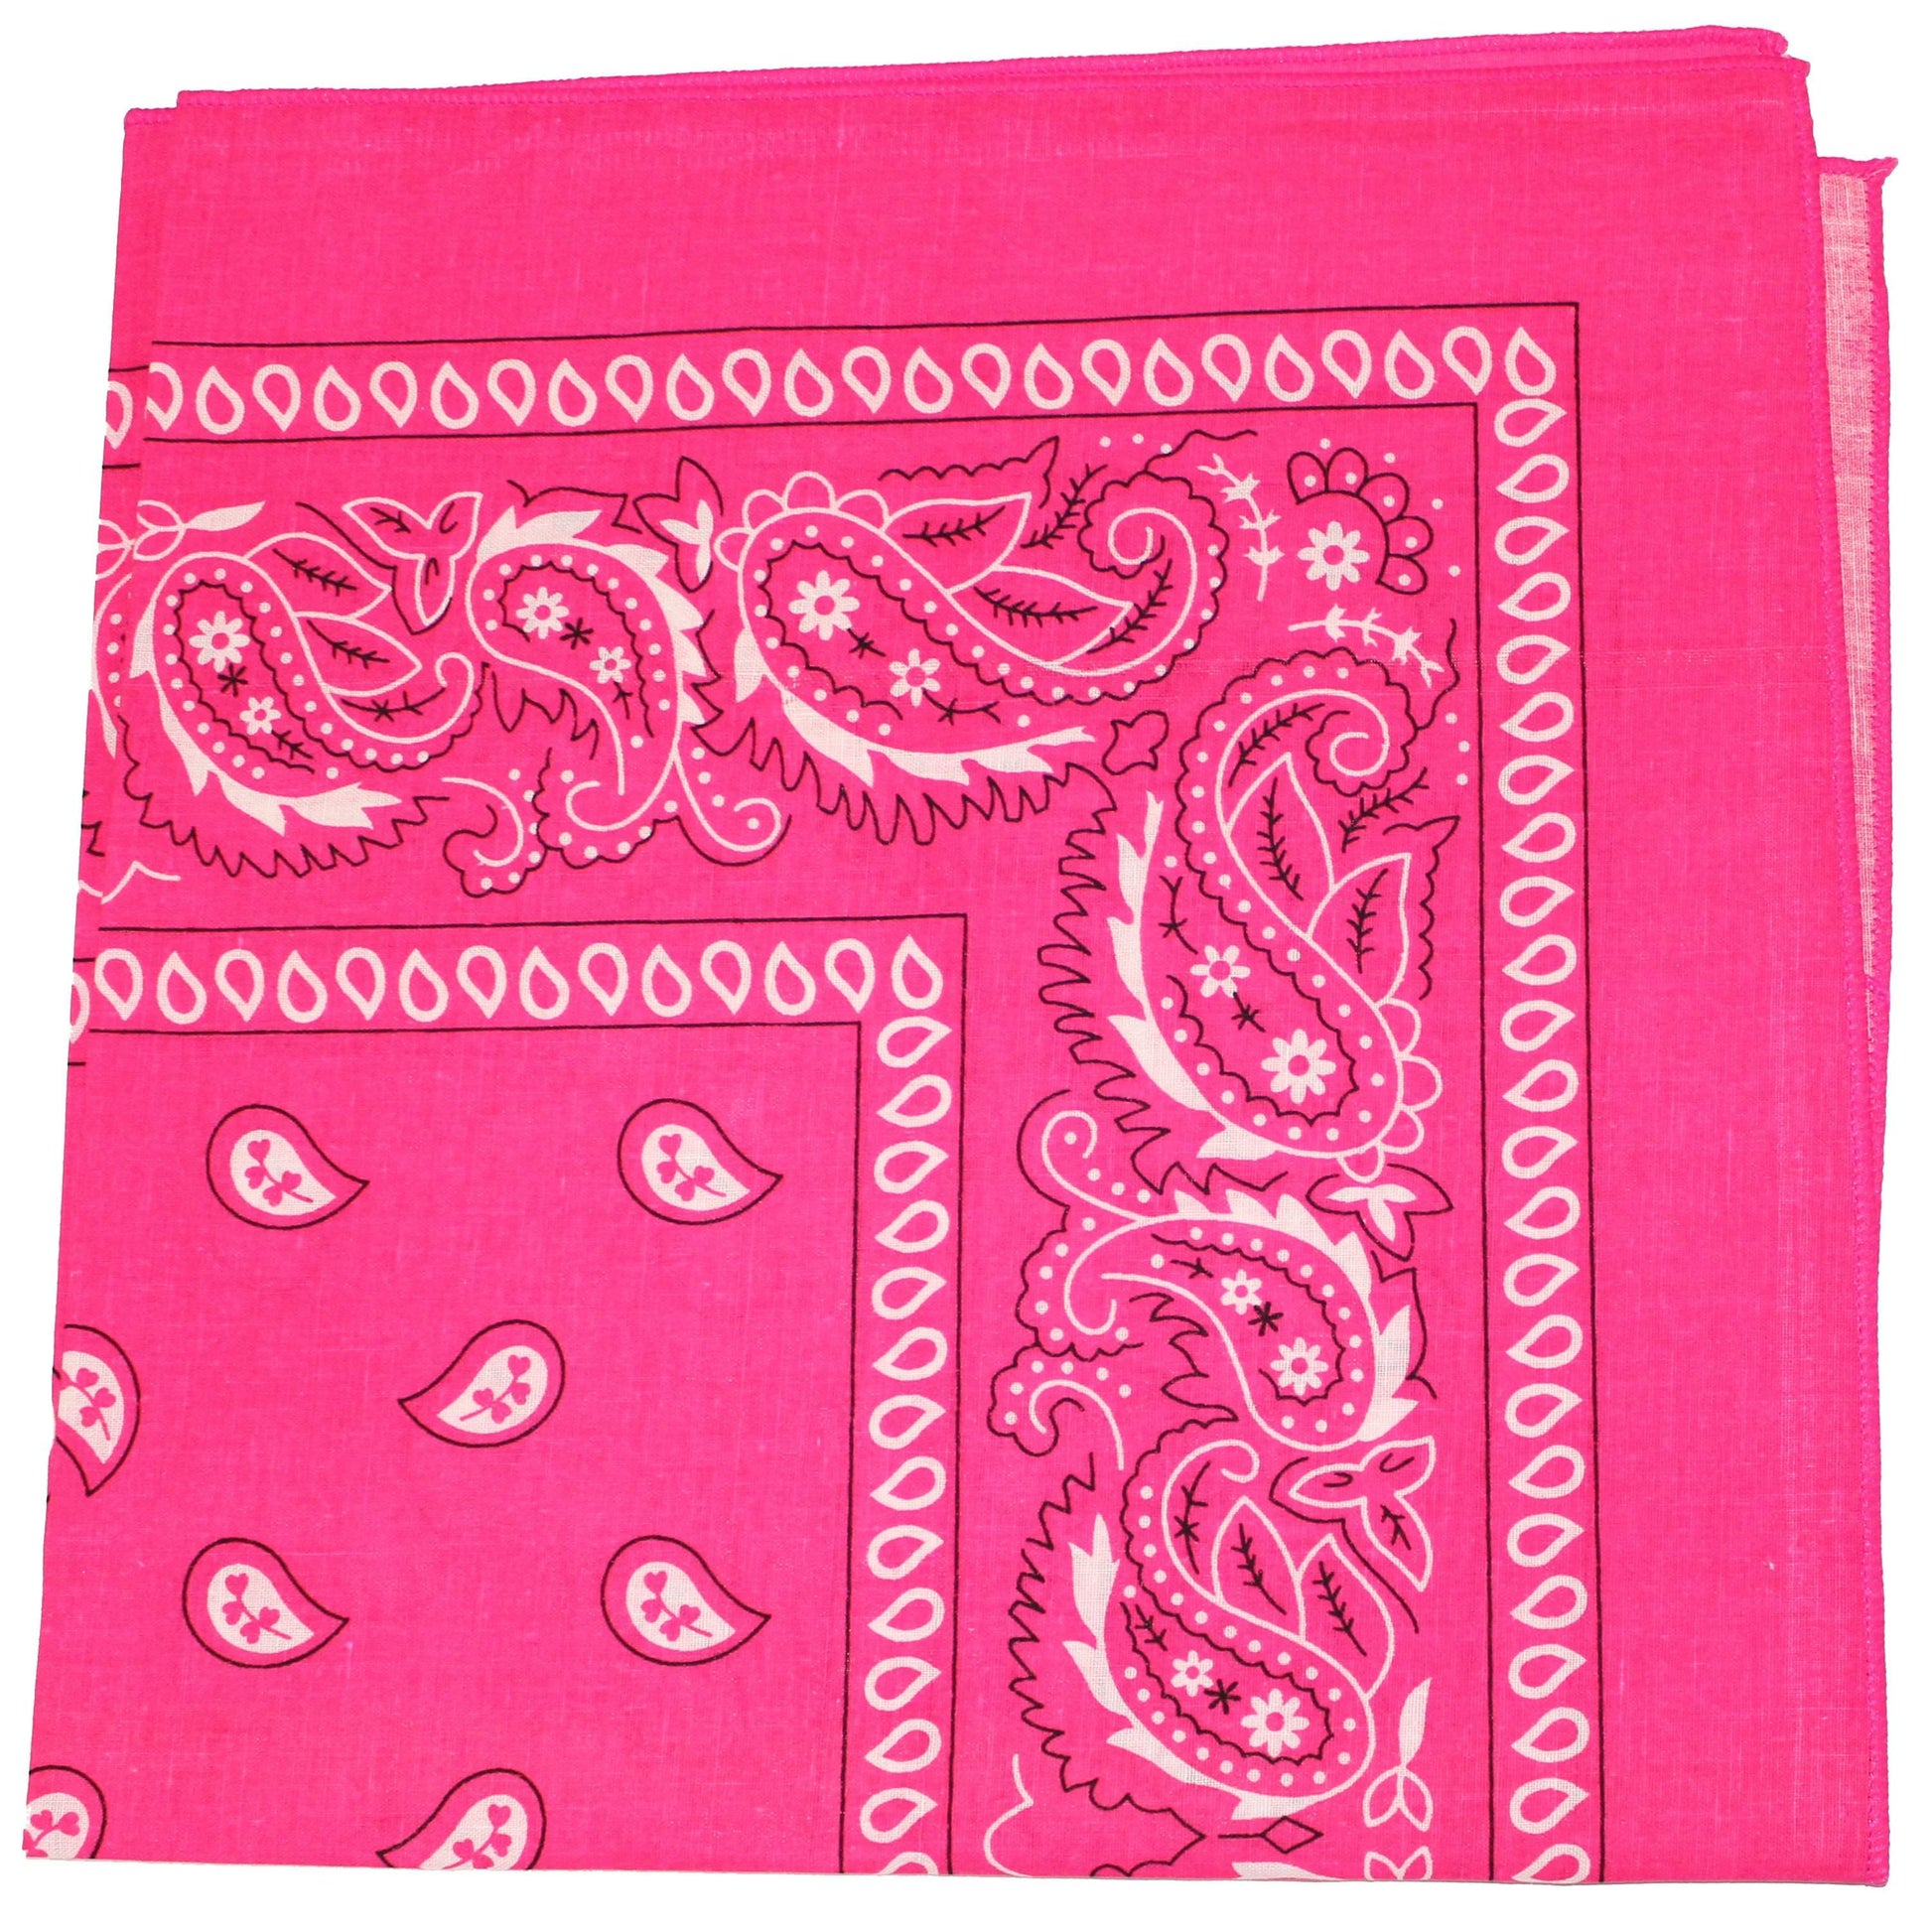 Qraftsy Neon Colors Paisley Bandana - Cotton - Available in 1 Pack or 3 Pack